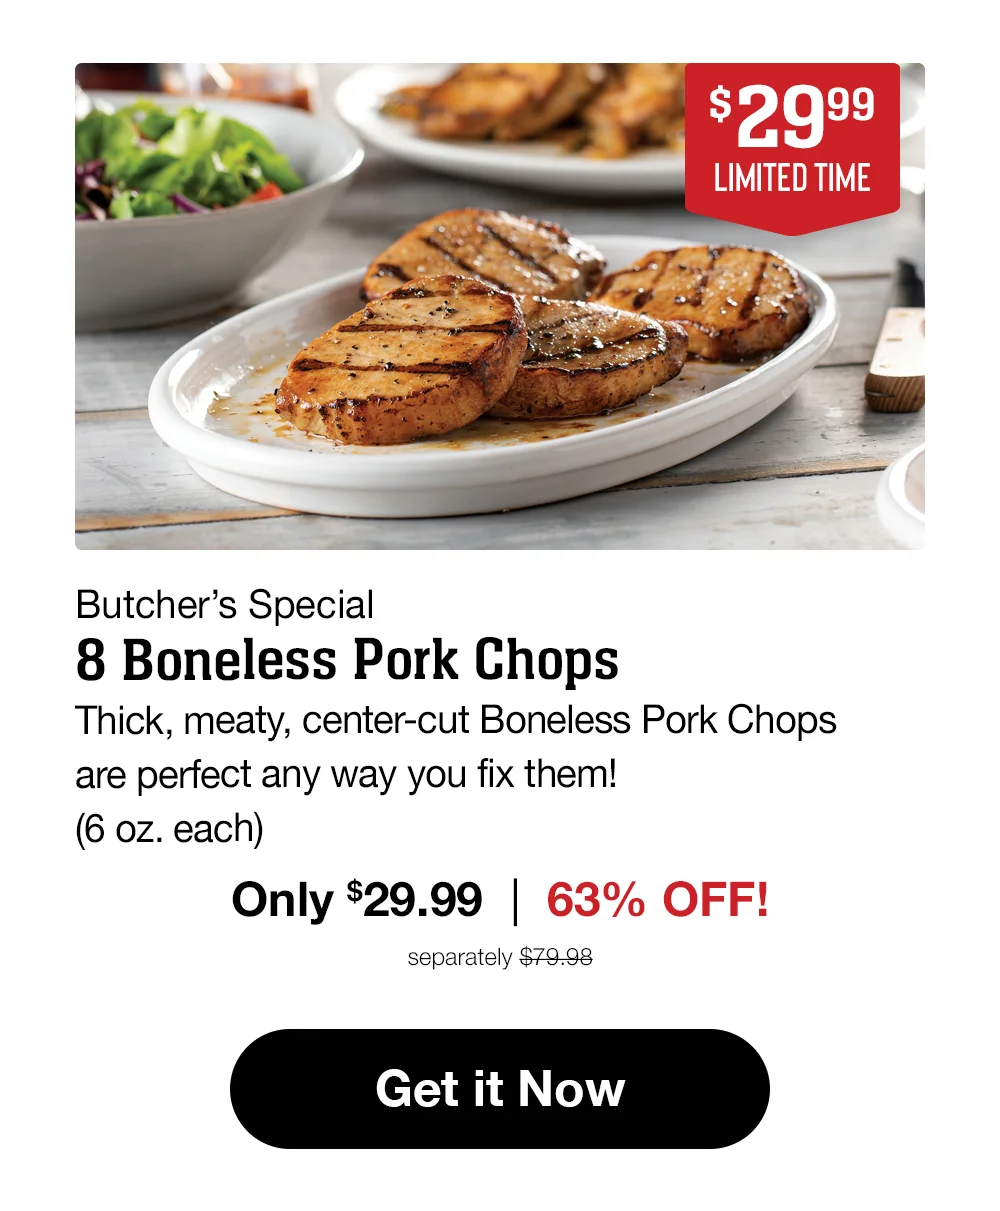 \\$29.99 LIMITED TIME Butcher's Special 8 Boneless Pork Chops Thick, meaty, center-cut Boneless Pork Chops are perfect any way you fix them! (6 oz. each) Only \\$29.99 | 63% OFF! separately \\$79.98 Get it Now